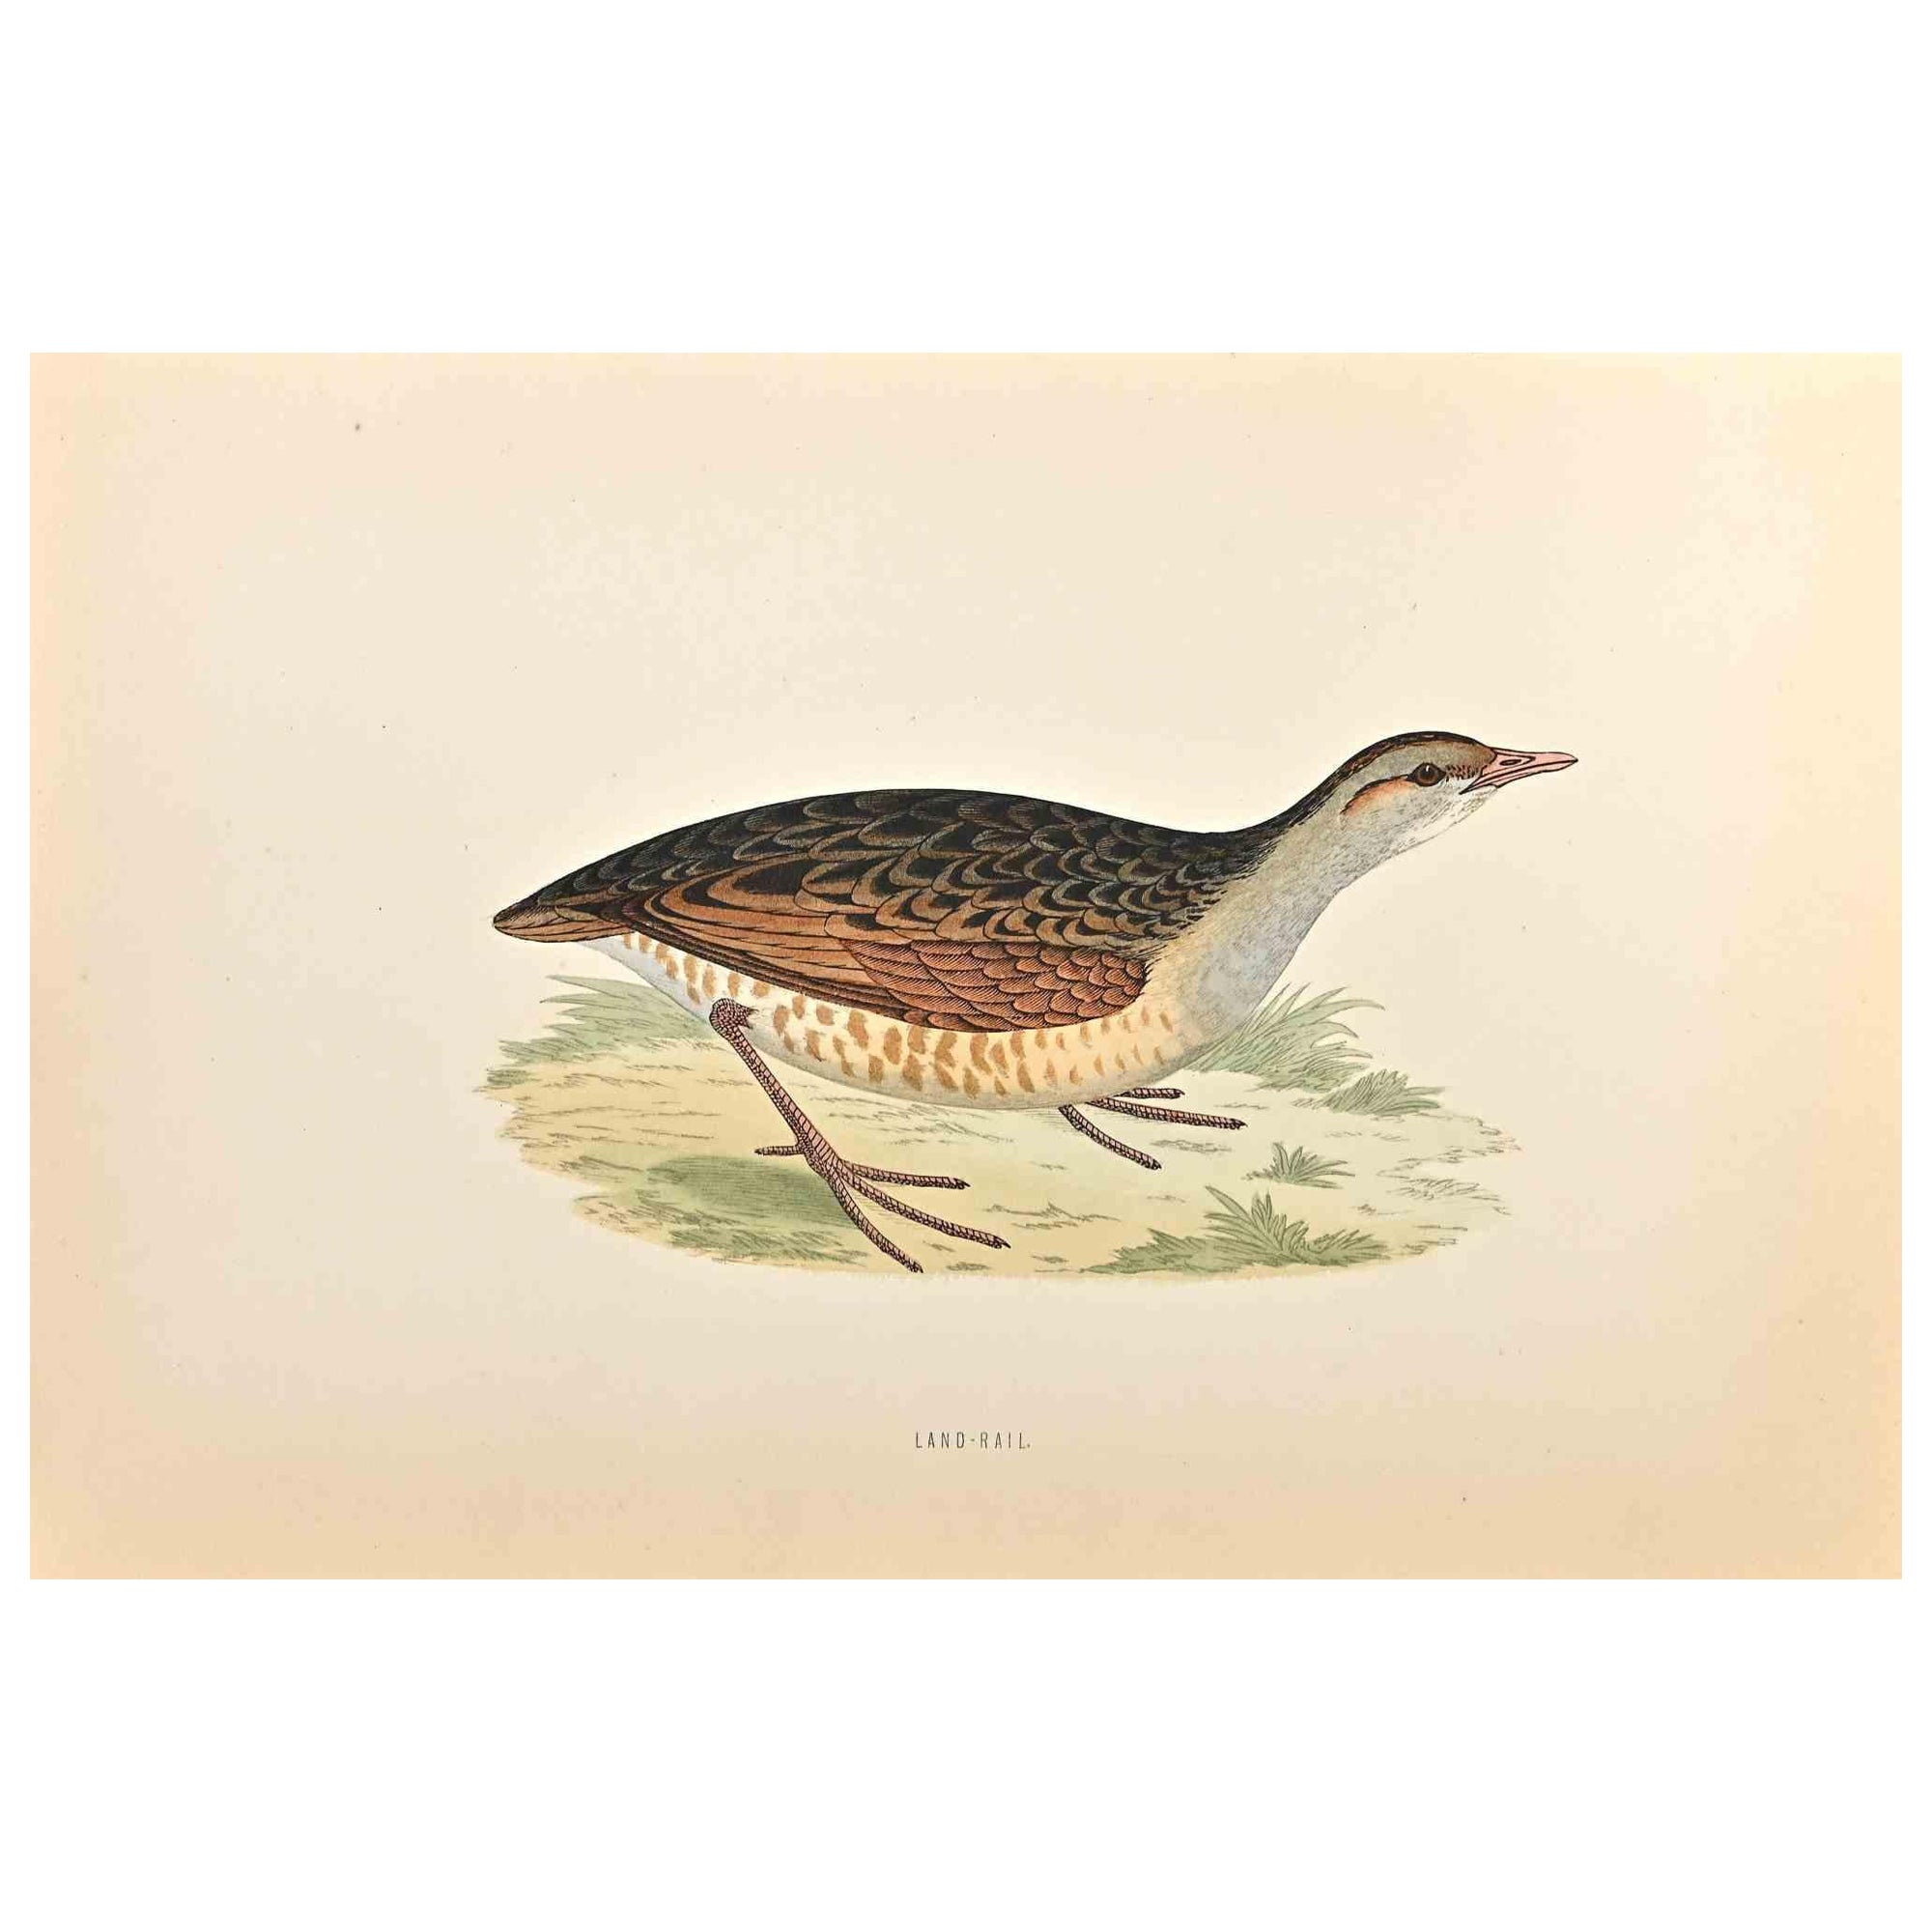 Land-Rail is a modern artwork realized in 1870 by the British artist Alexander Francis Lydon (1836-1917).

Woodcut print on ivory-colored paper.

Hand-colored, published by London, Bell & Sons, 1870.  

The name of the bird is printed on the plate.